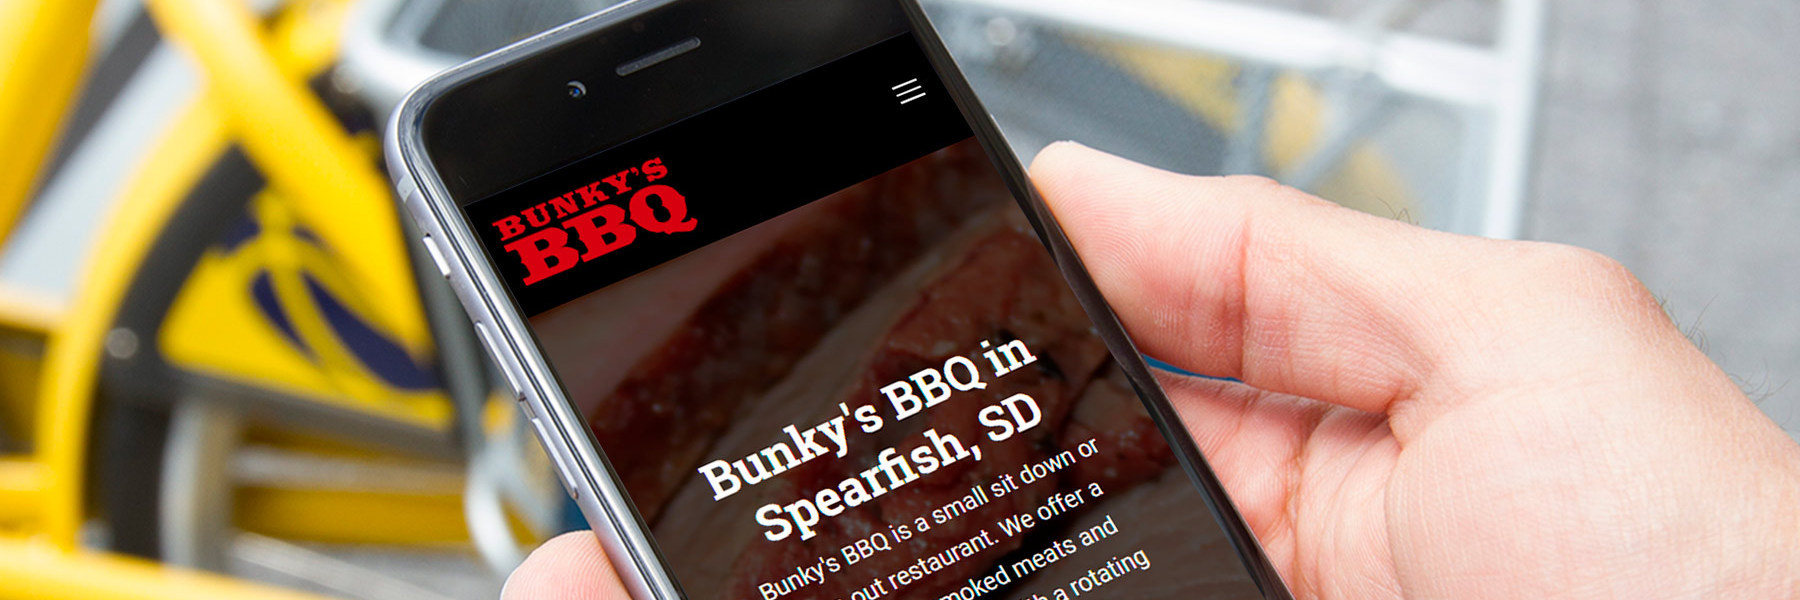 Bunky's BBQ Website on iphone